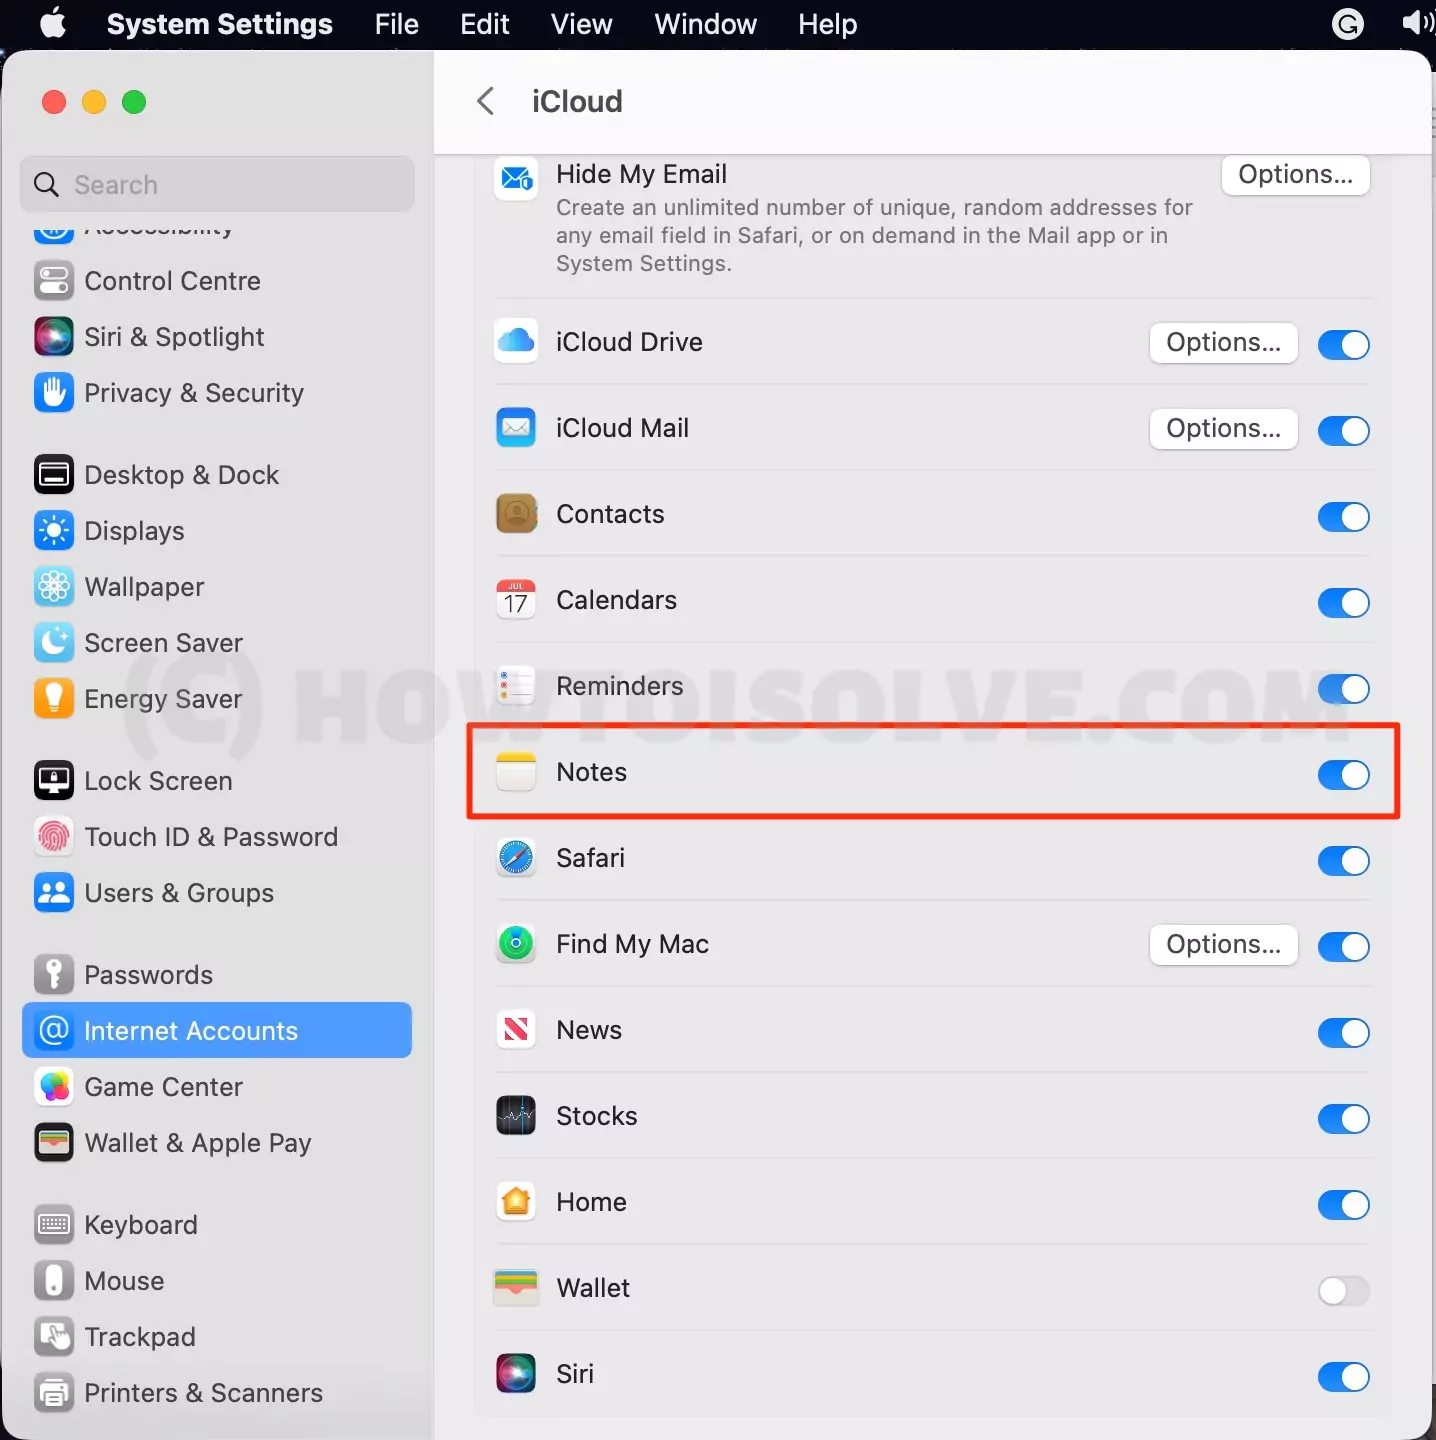 enable-notes-from-icloud-account-on-mac-in-macos-ventura